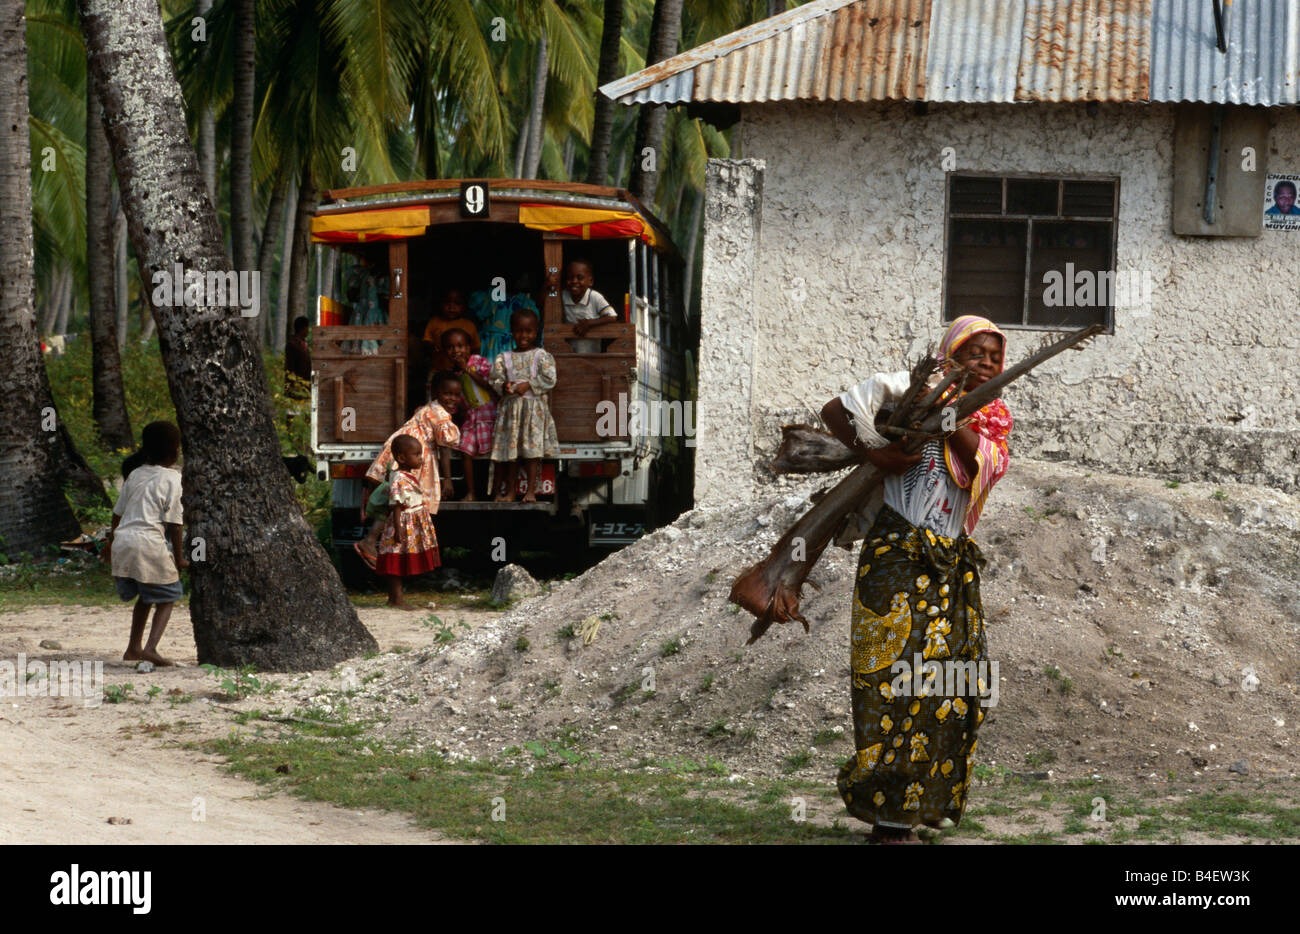 Woman collecting firewood, children playing on bus in background in village. Zanzibar. Stock Photo